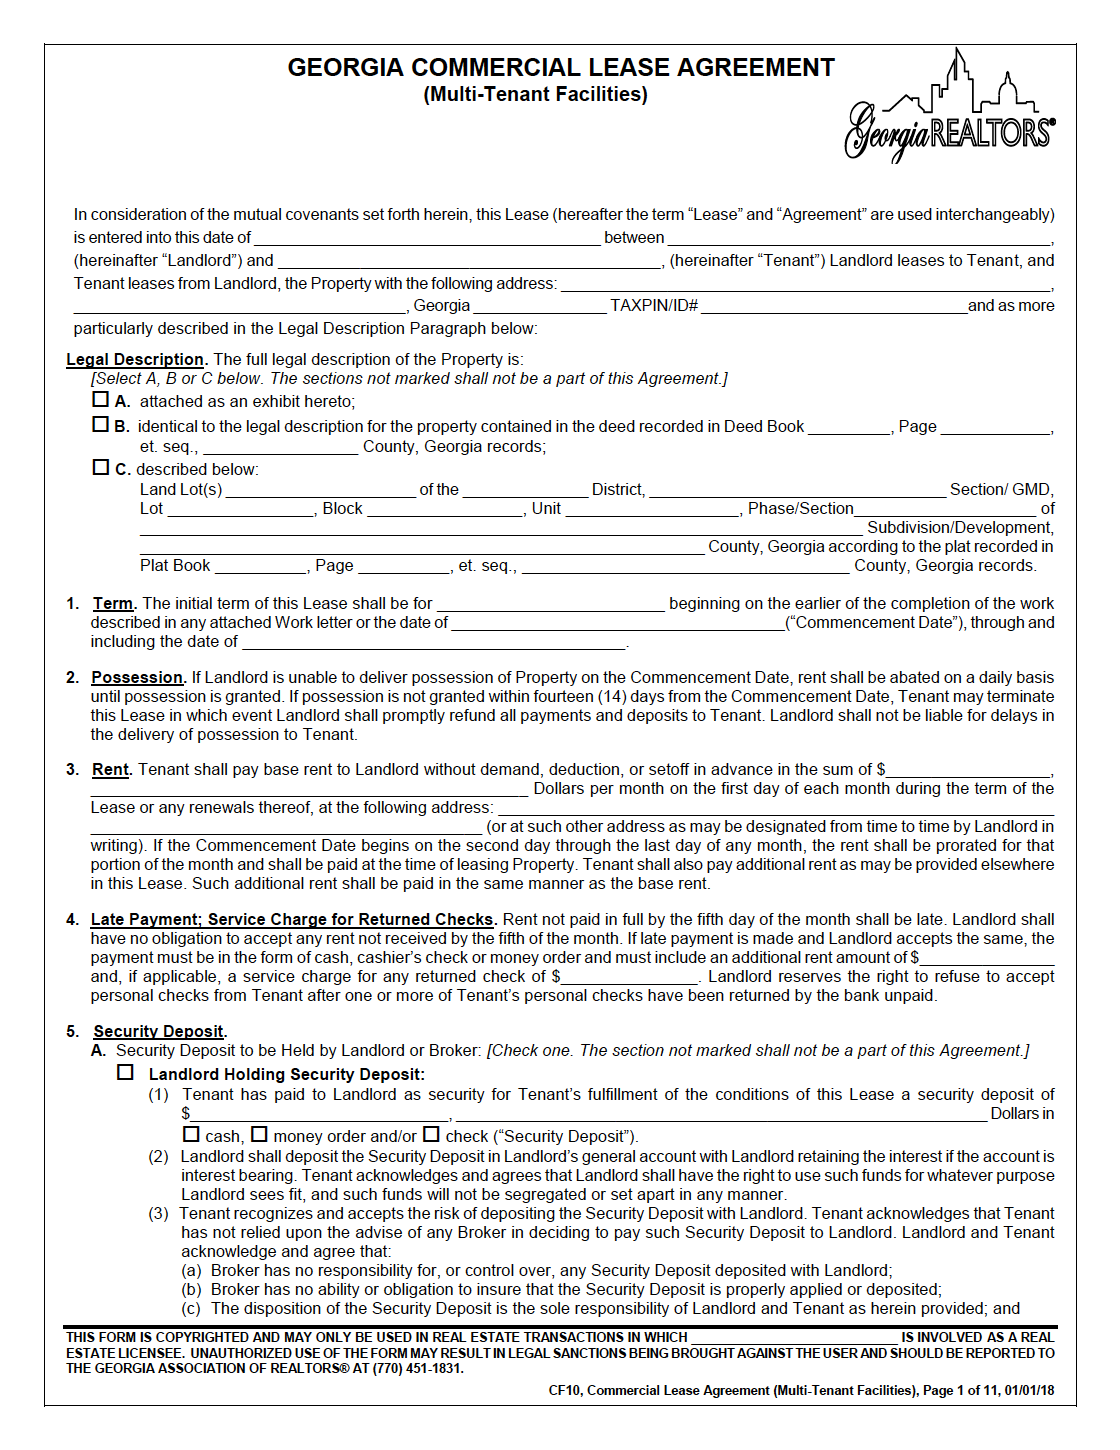 free-georgia-commercial-lease-agreement-pdf